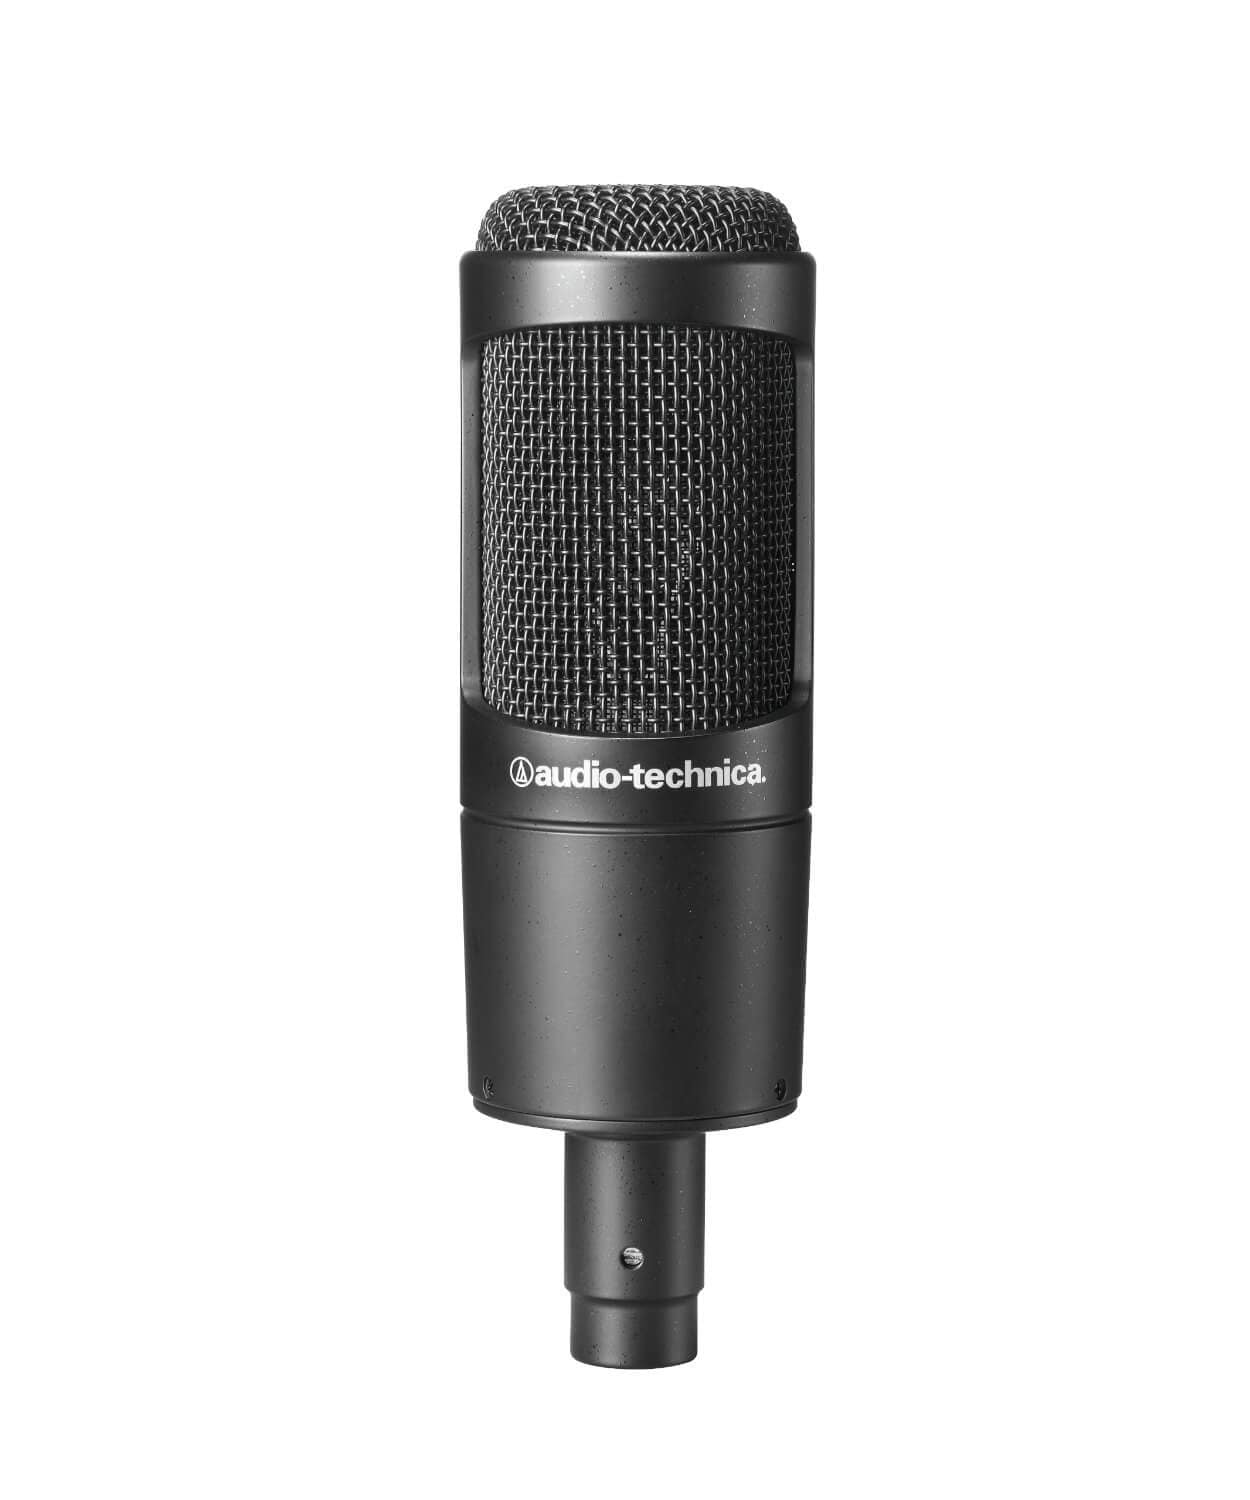  Best Microphone for Music (Vocals): Audio-Technica AT2035